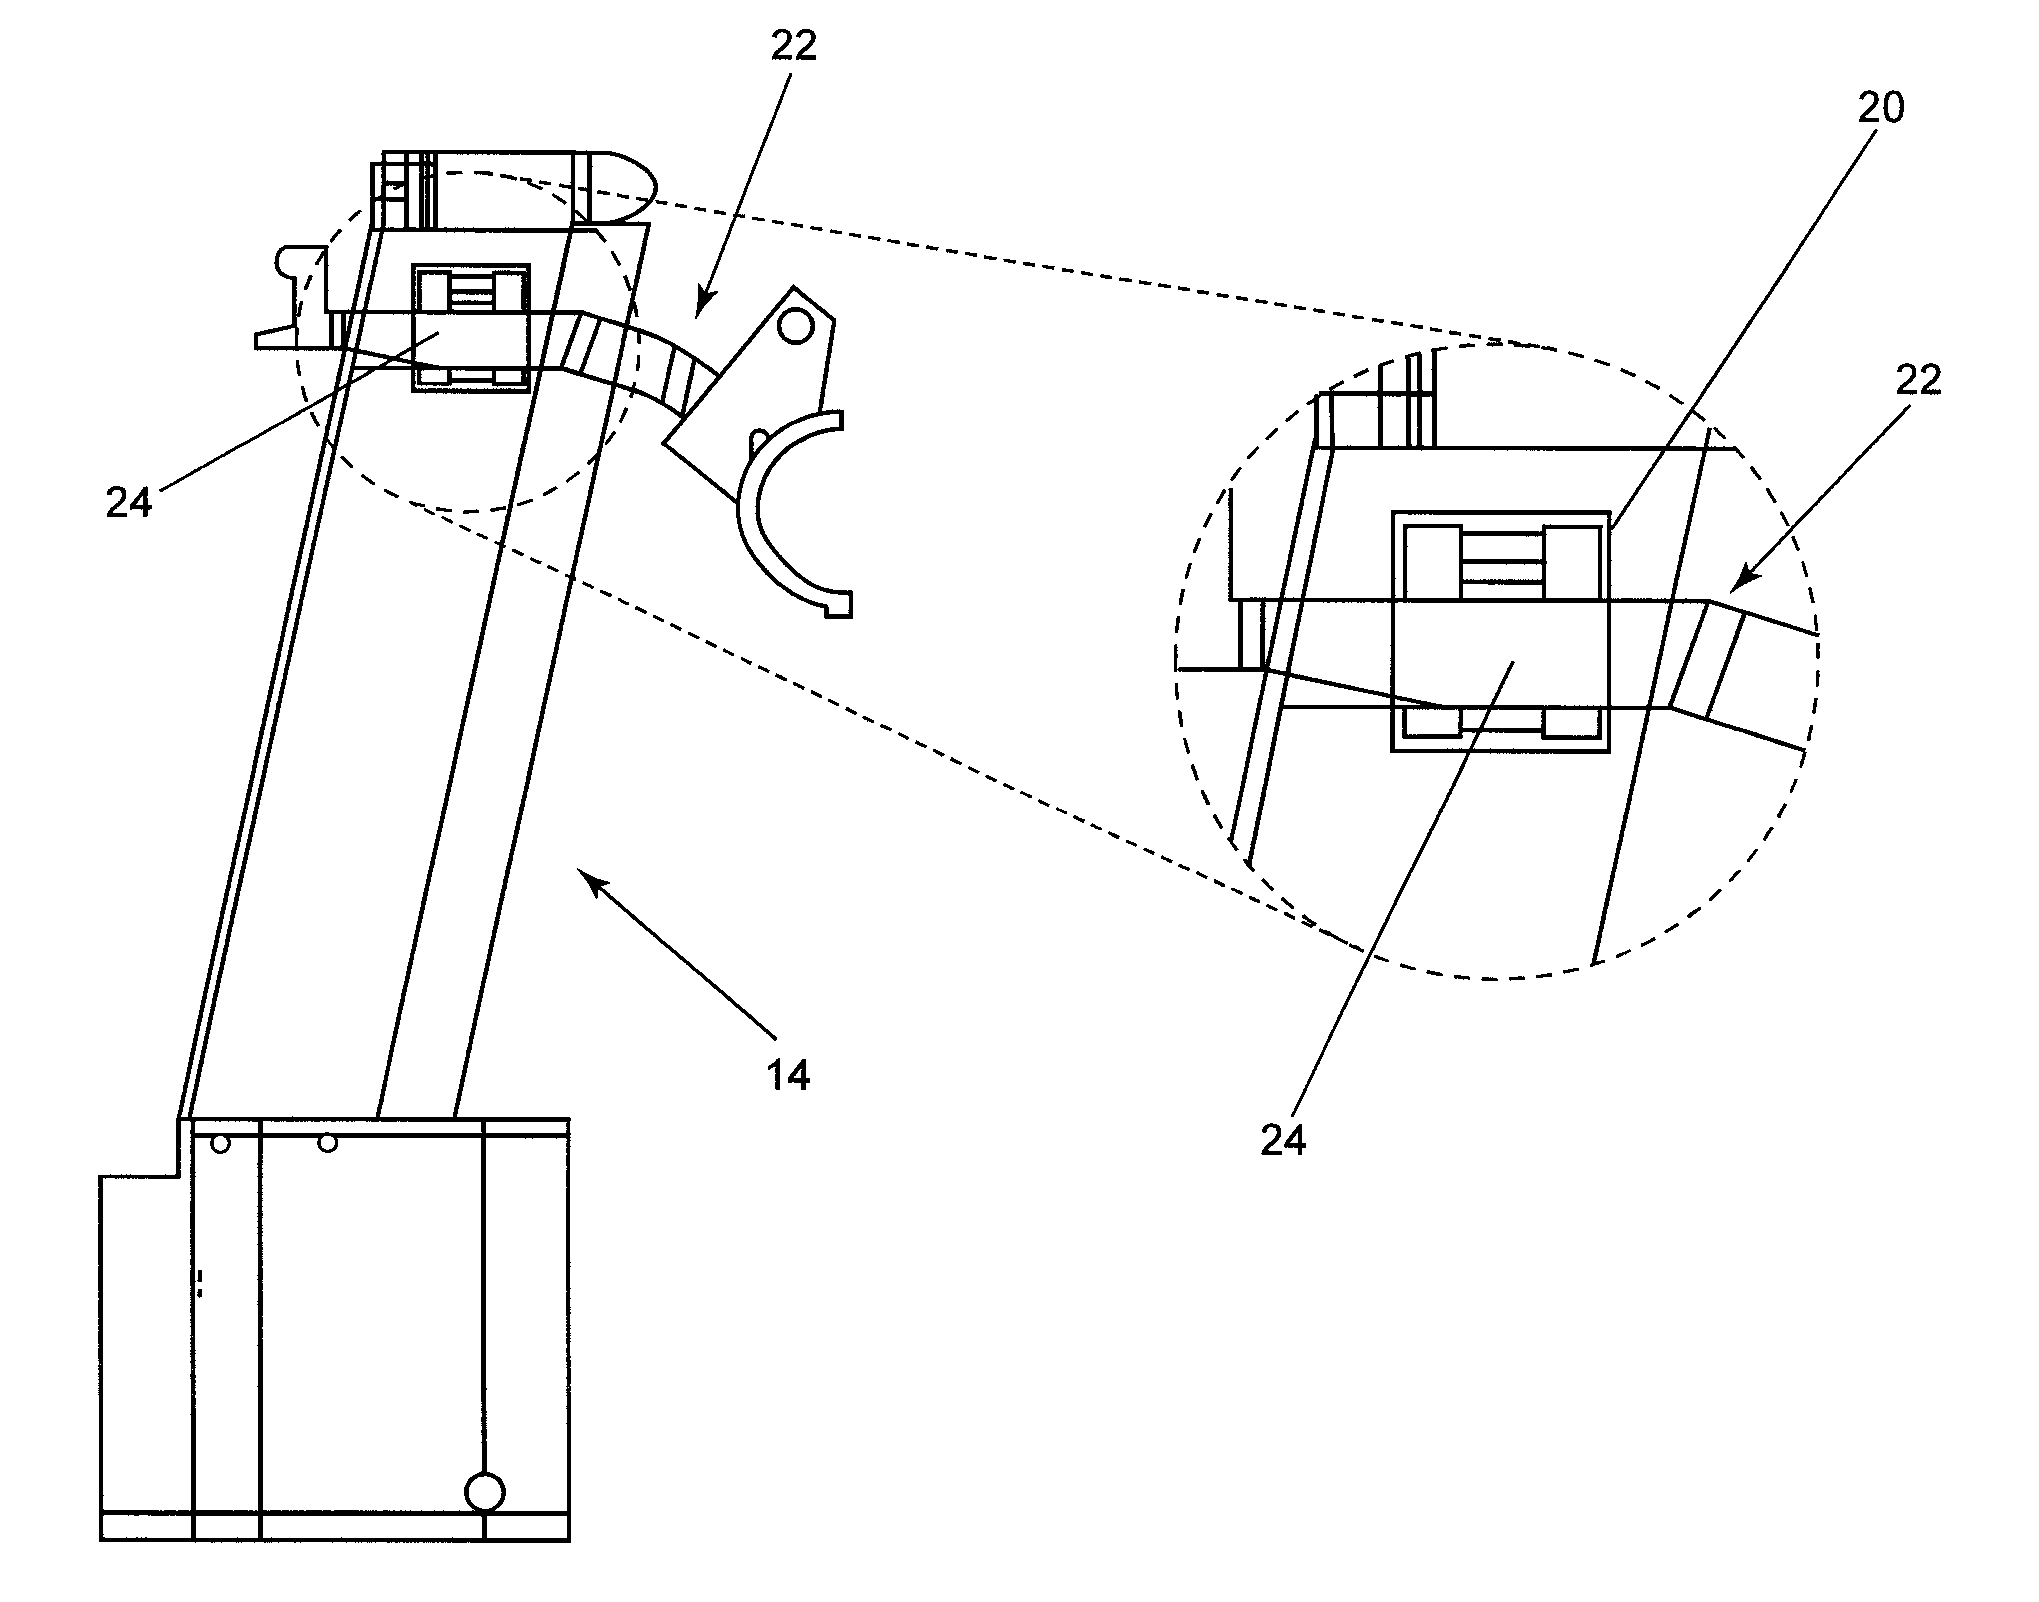 Magazine based, firearm safety apparatus for modifying existing firearms employing a digital, close proximity communications system and a low power electro-permanent magnet interlock system